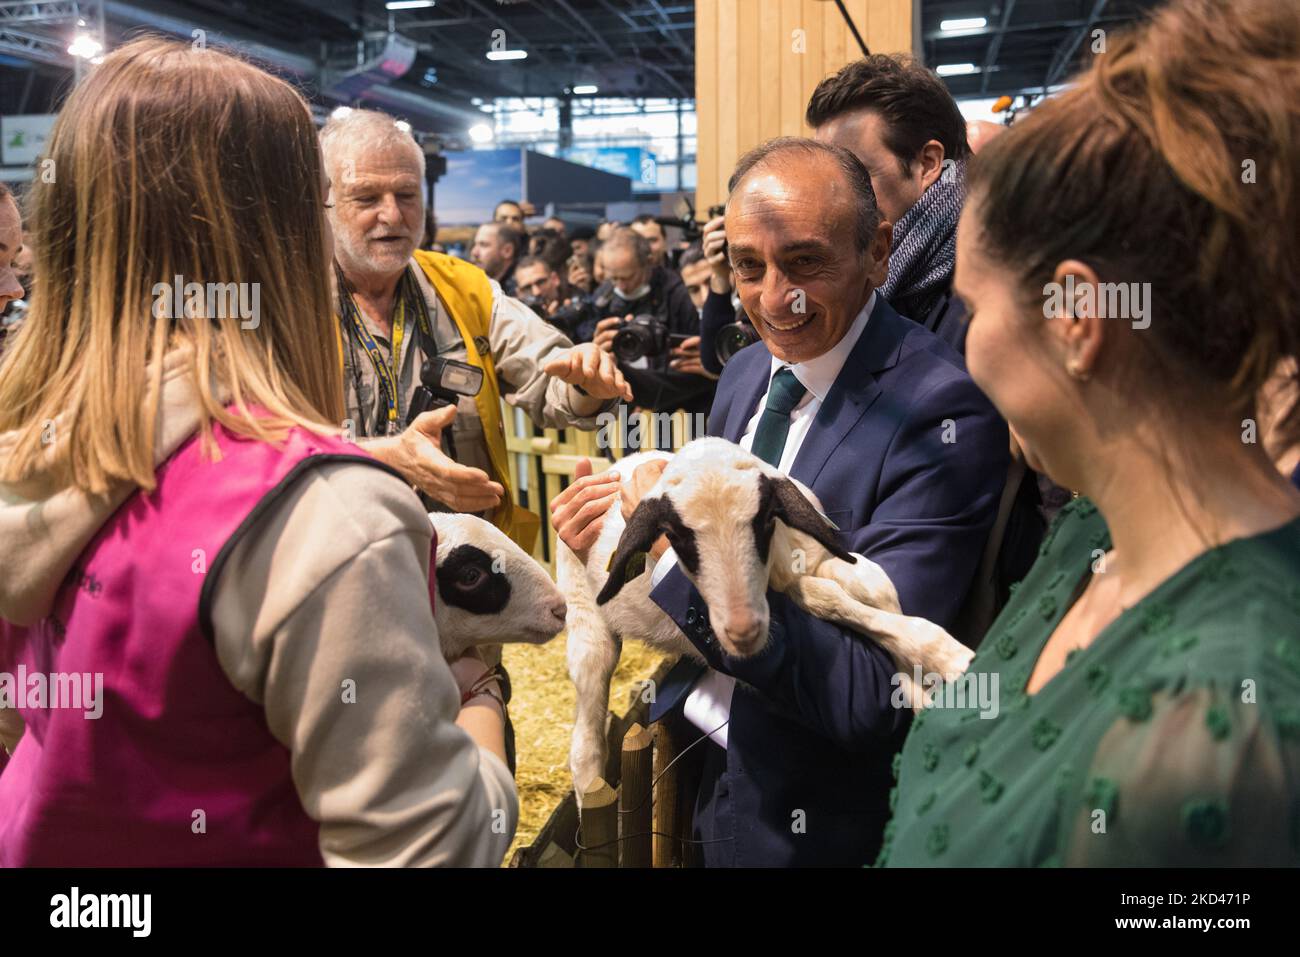 Eric Zemmour, polemical candidate in the French presidential election for the far-right Reconquest (R!) party, carries a lamb in his arms during the traditional walk of the presidential candidates at the International Agricultural Show currently being held at the Parc des expositions de la Porte de Versailles in Paris to meet producers, breeders and the French people on March 4, 2022 (Photo by Samuel Boivin/NurPhoto) Stock Photo